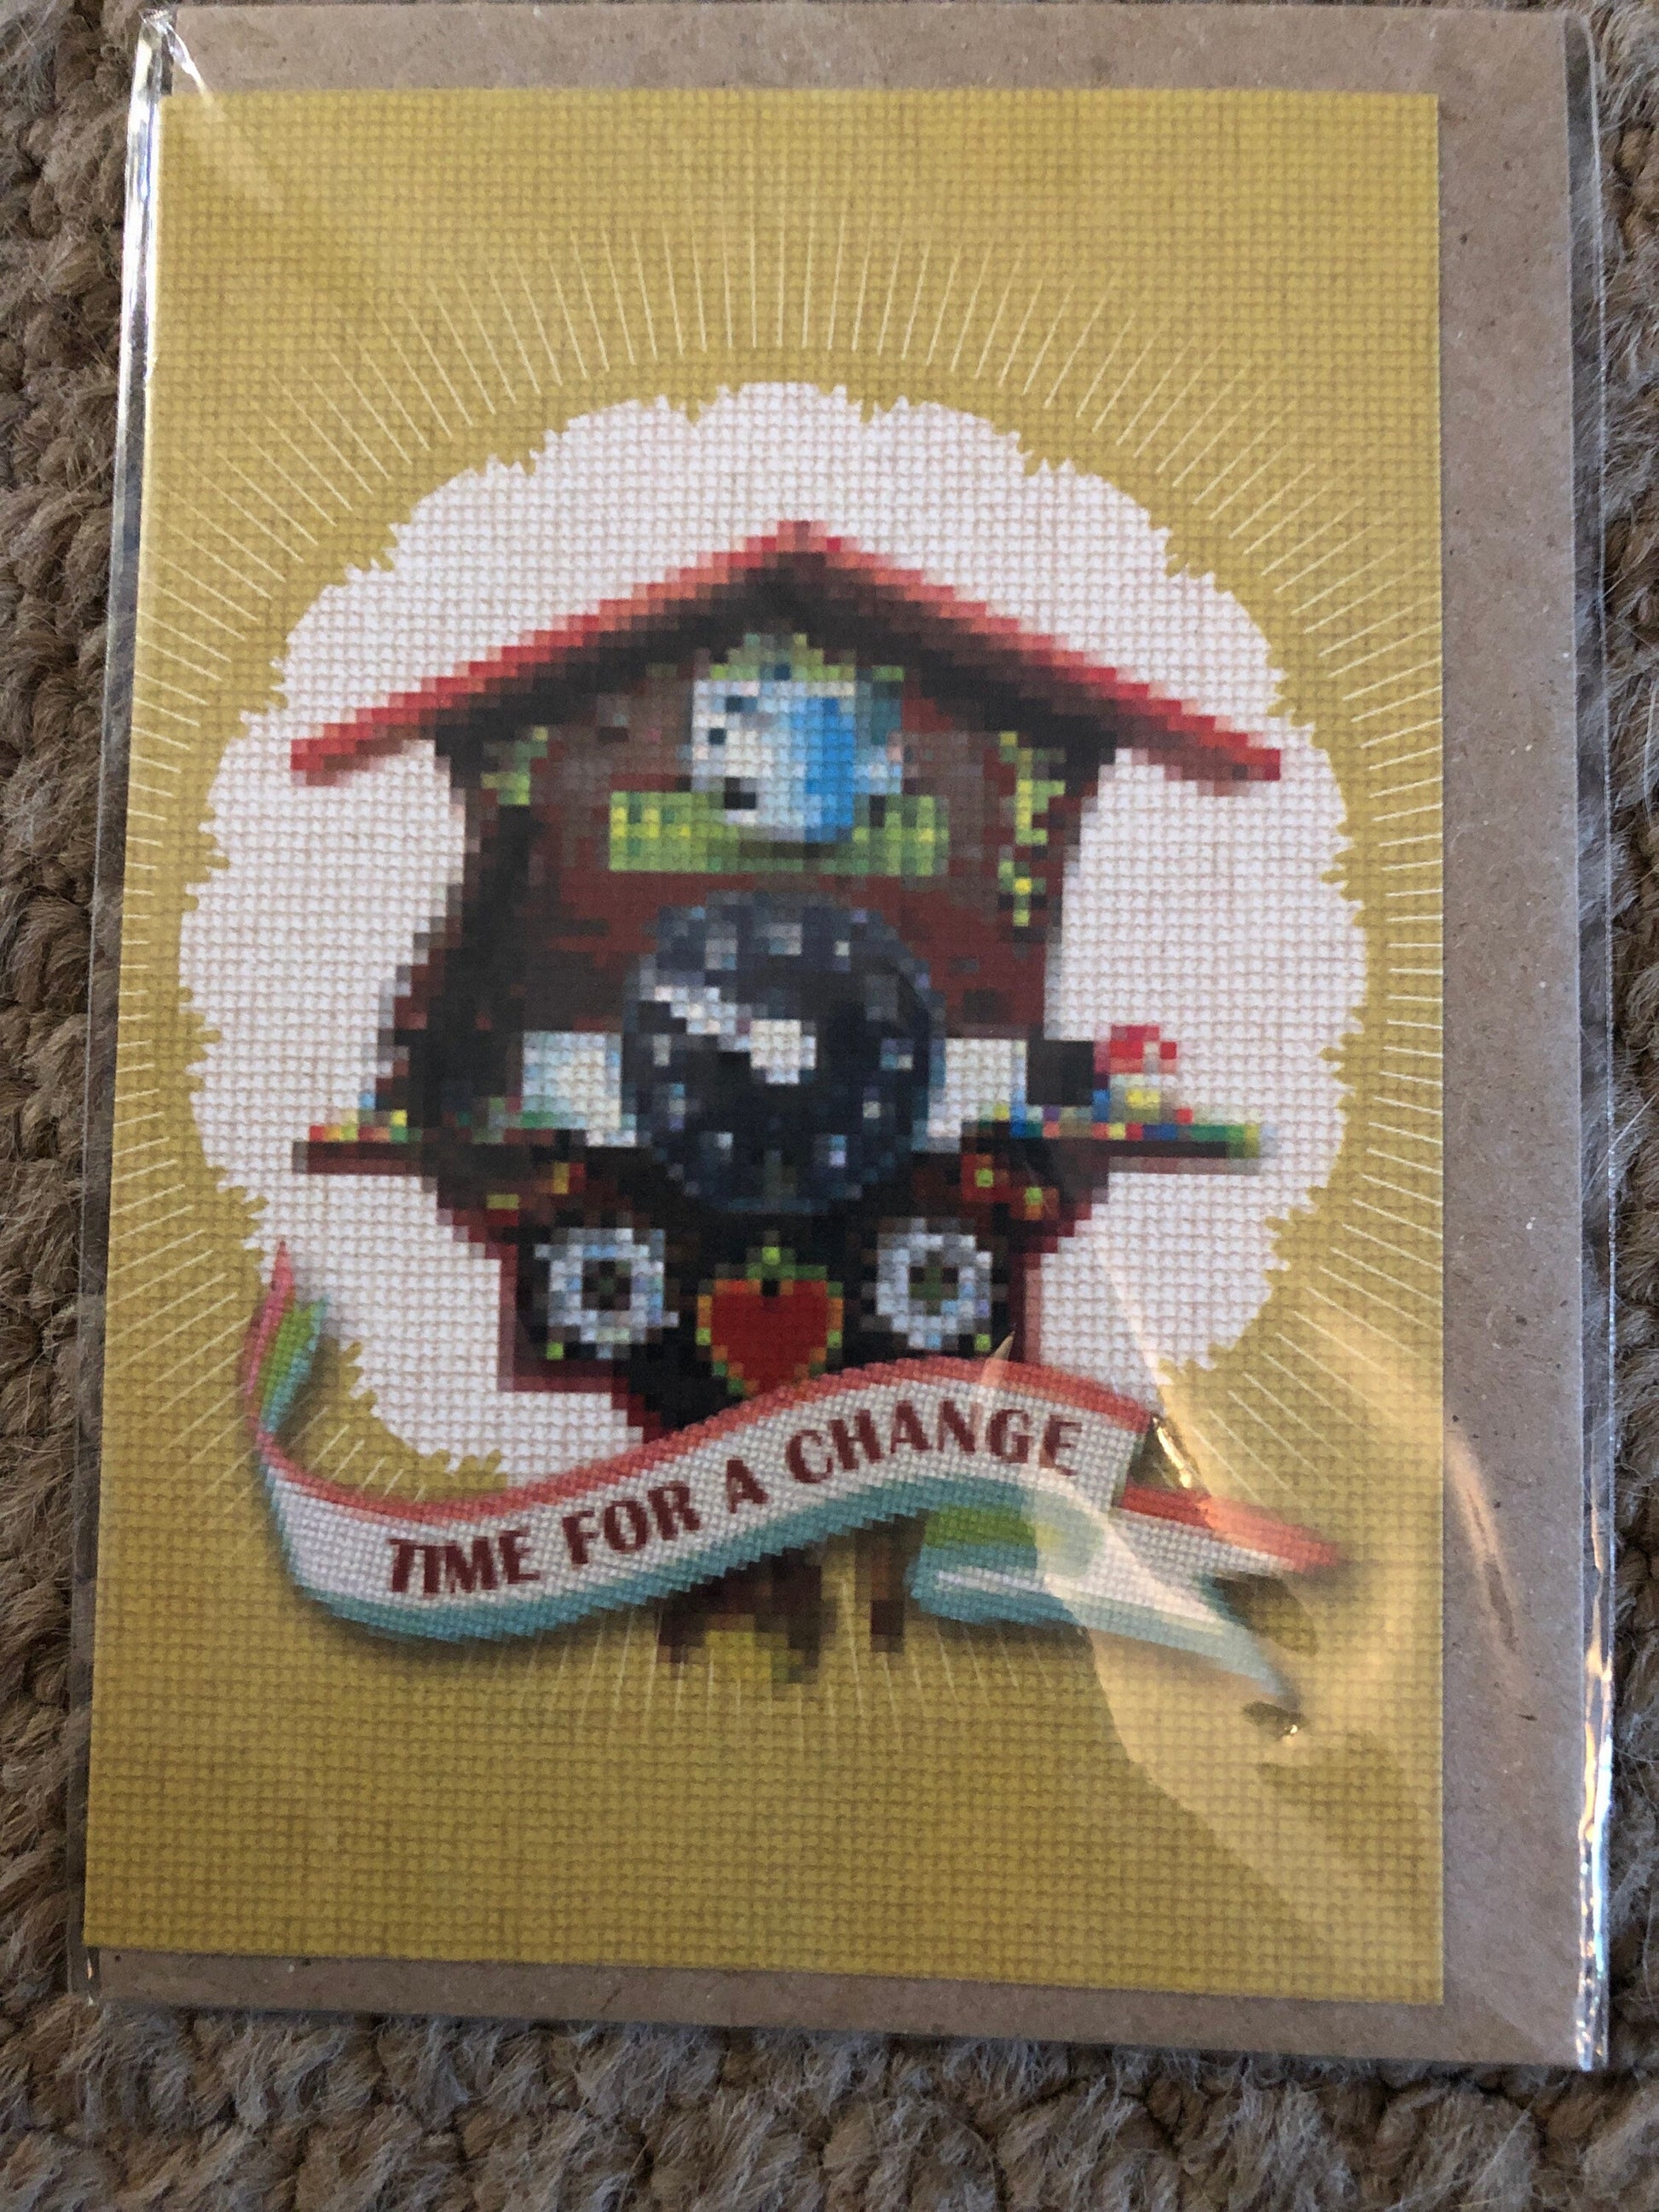 TIME For a CHANGE retro kitsch greetings card cross-stitch cuckoo clock German